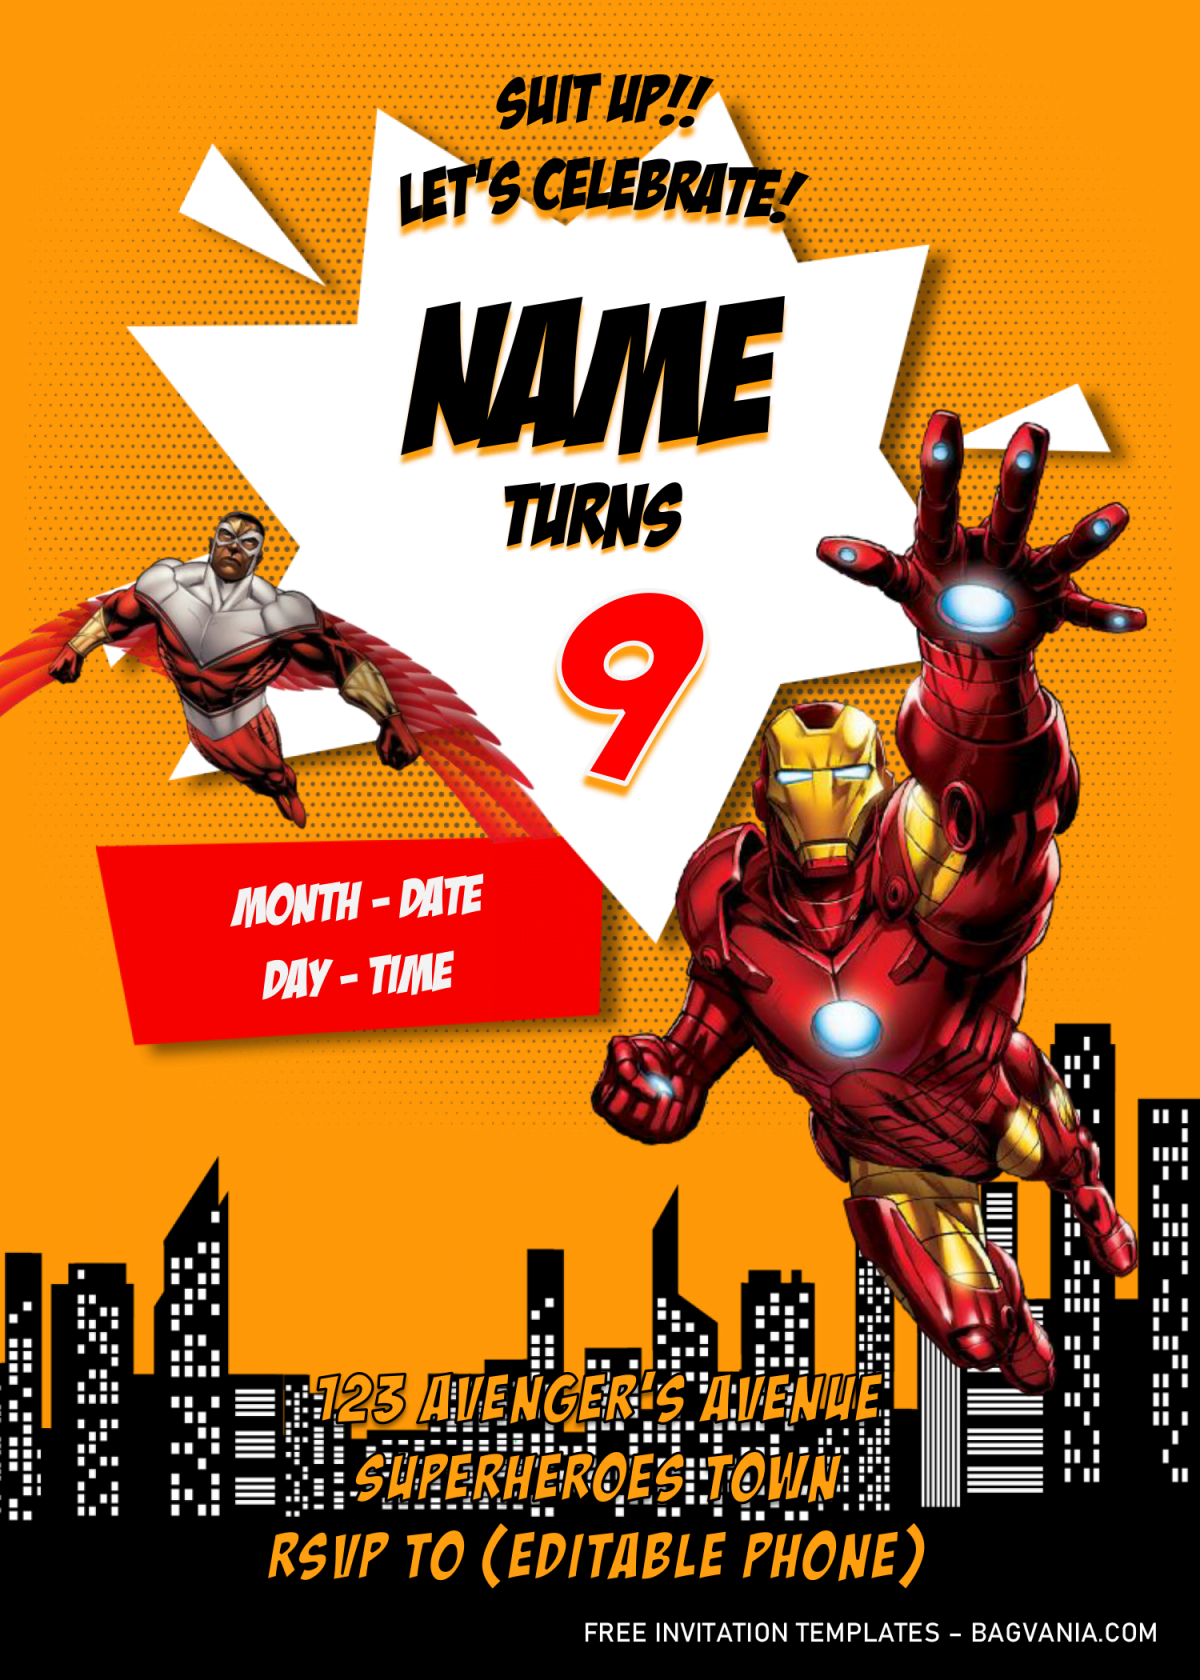 Avengers Birthday Party Invitation Templates - Editable With MS Word and has ironman